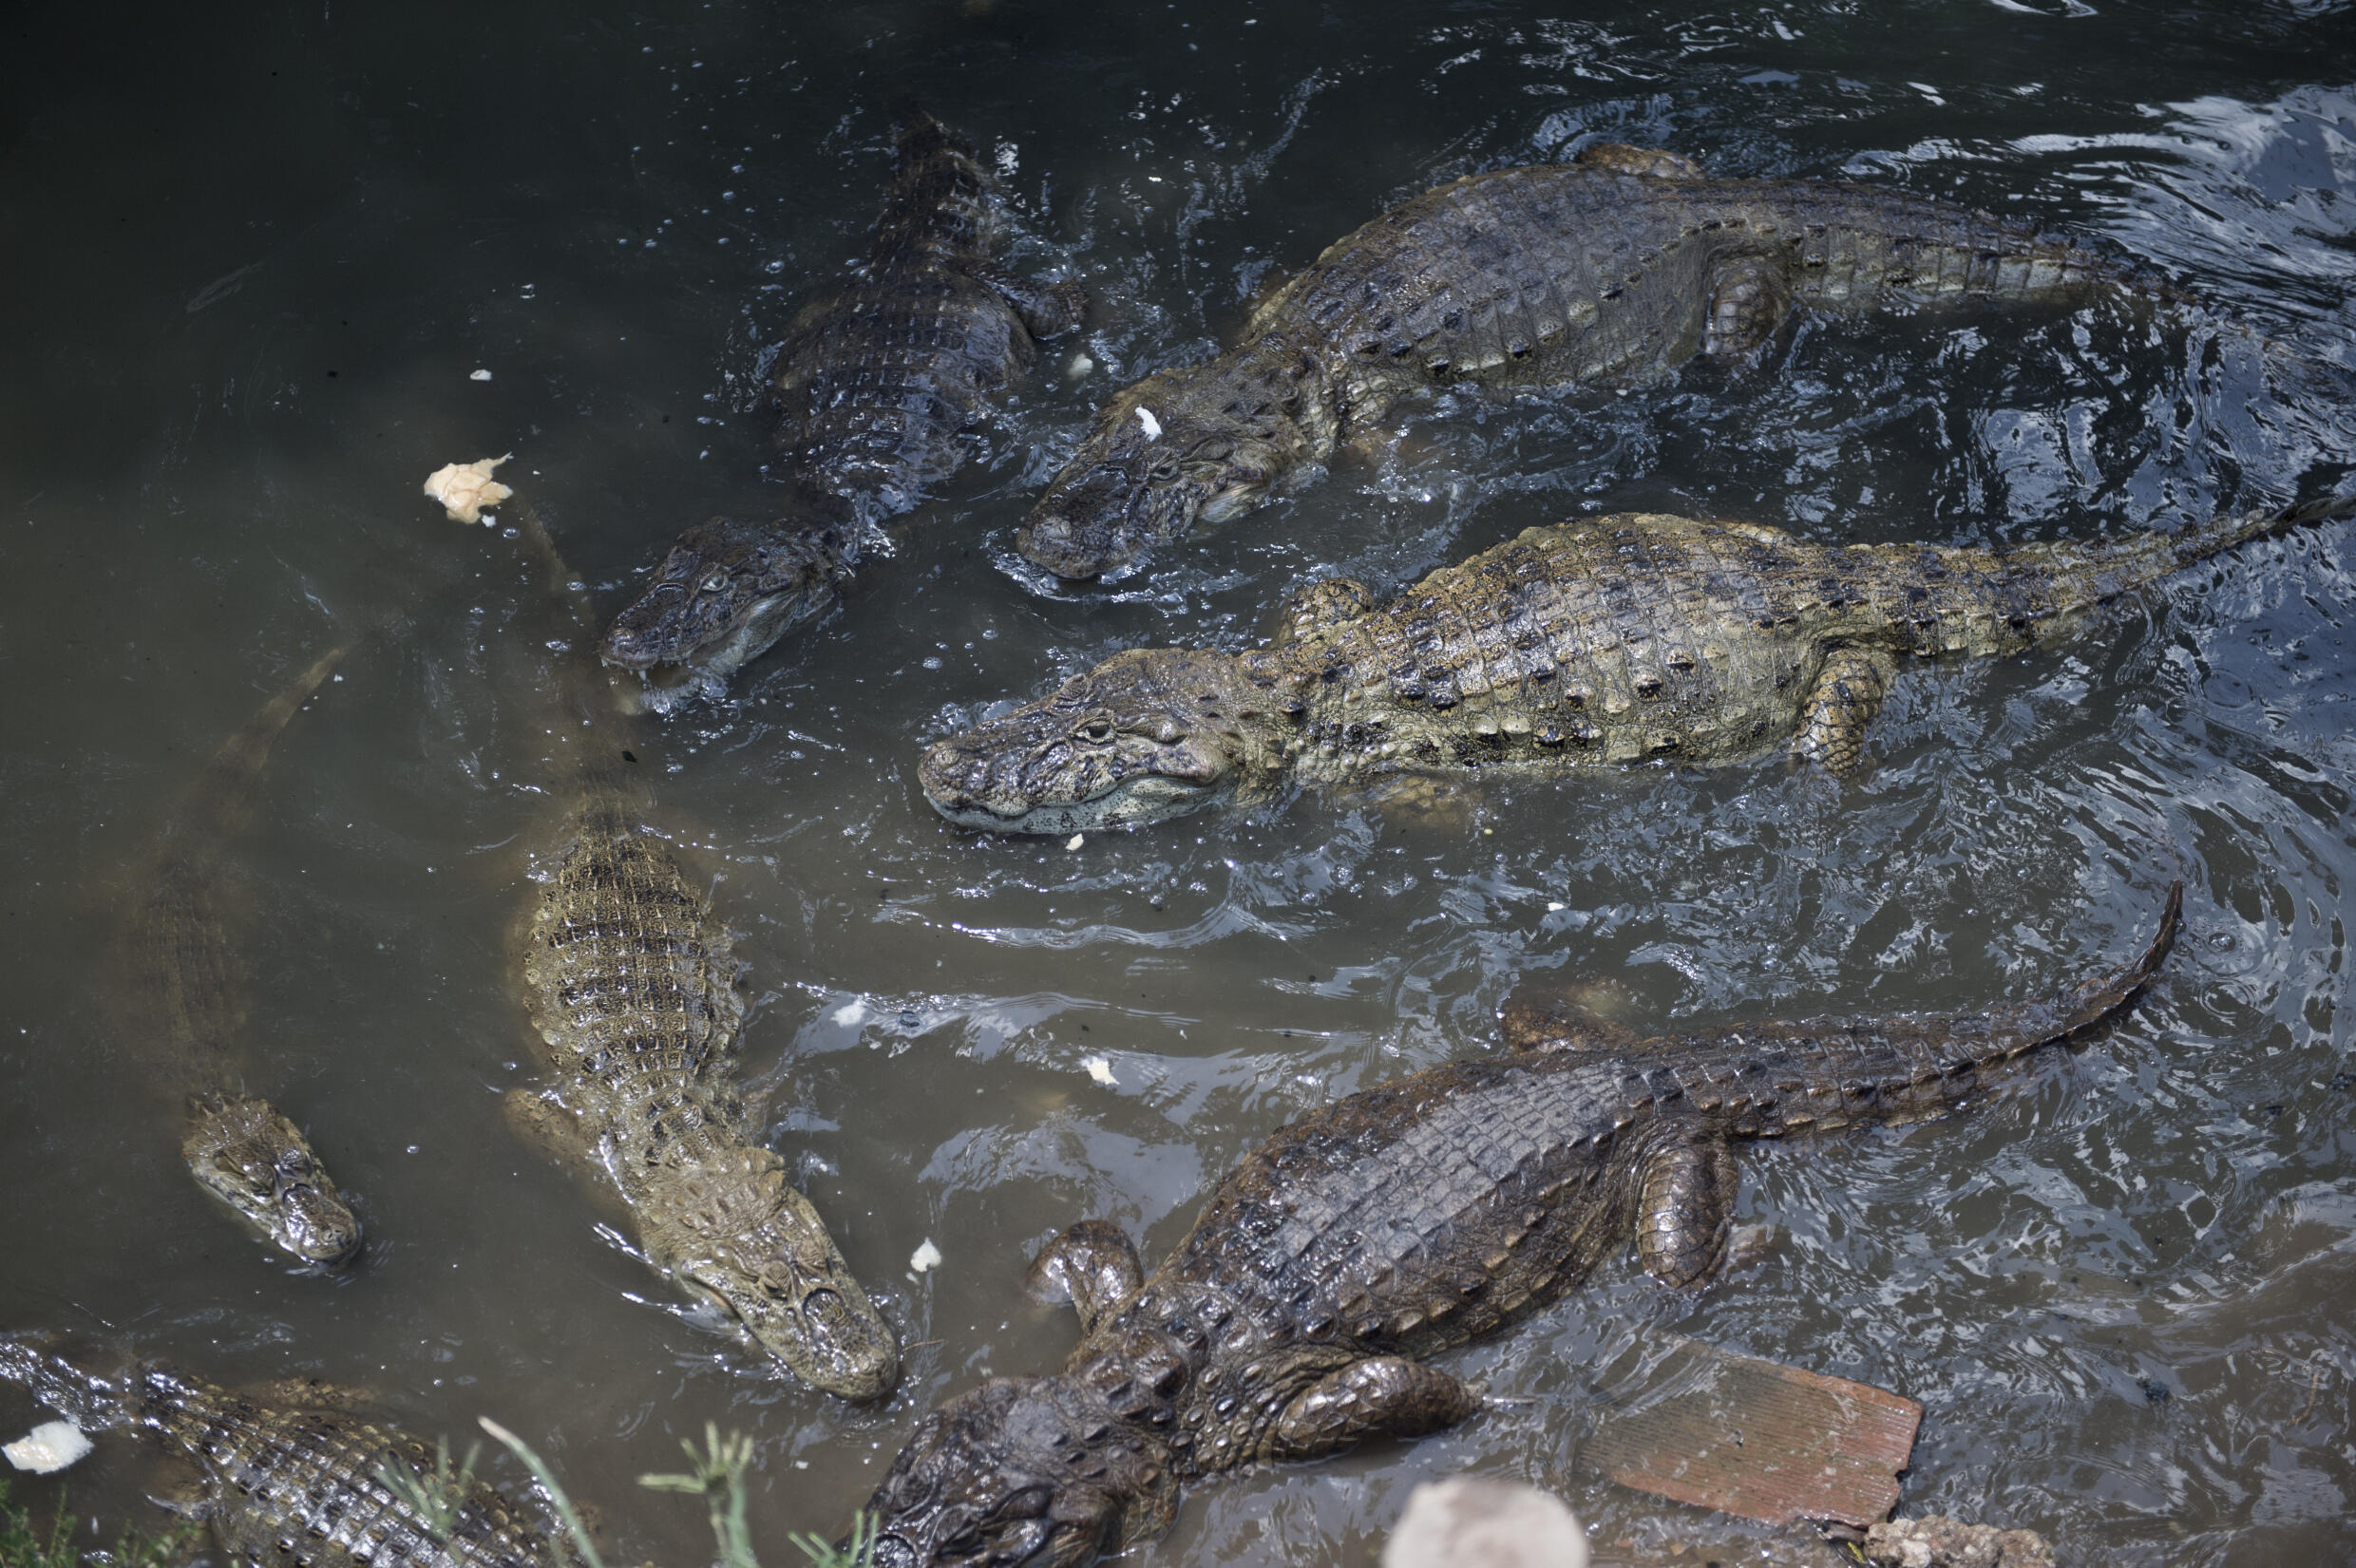 Several broad-snouted caimans (Caiman latirostris) swim in a ditch that goes through the built-up area in the Tereirao shantytown in Recredo dos Bandeirantes, western Rio de Janeiro, Brazil on January 29, 2015. Photo: AFP